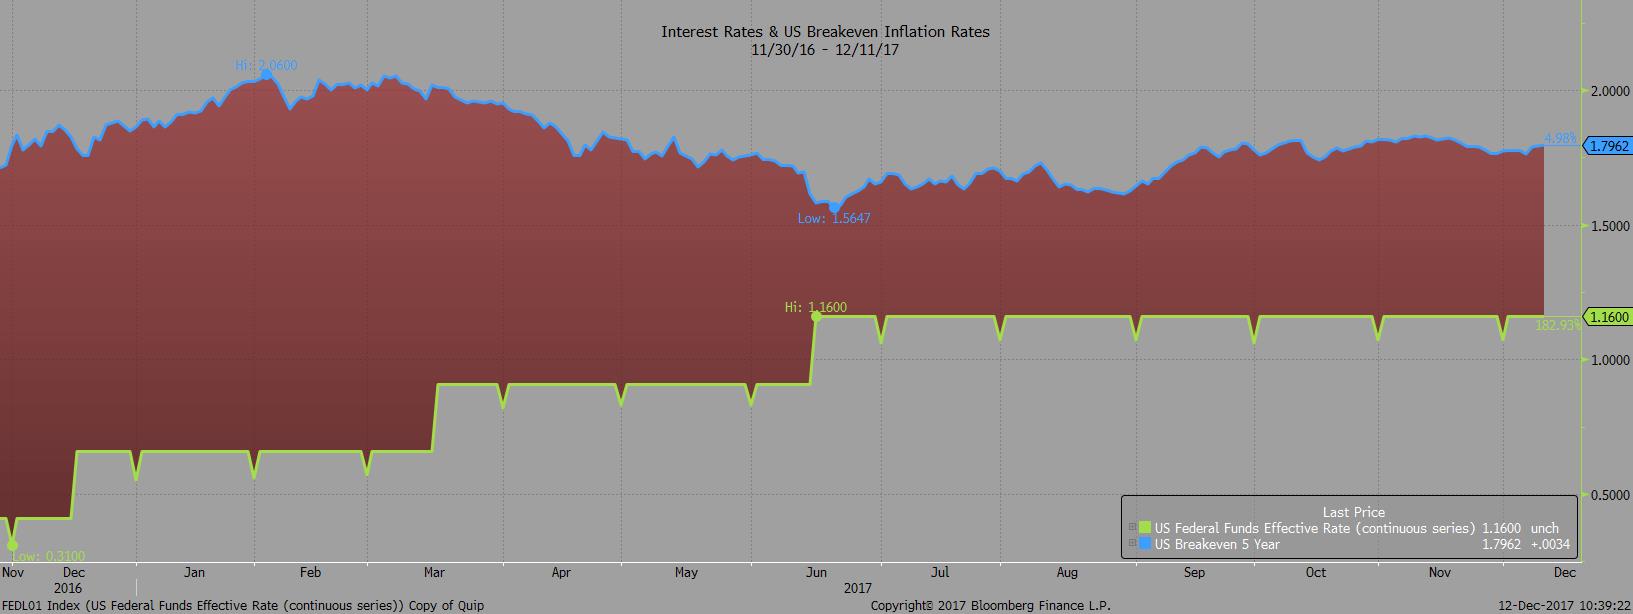 Interest Rates and US Breakeven Inflation Rates